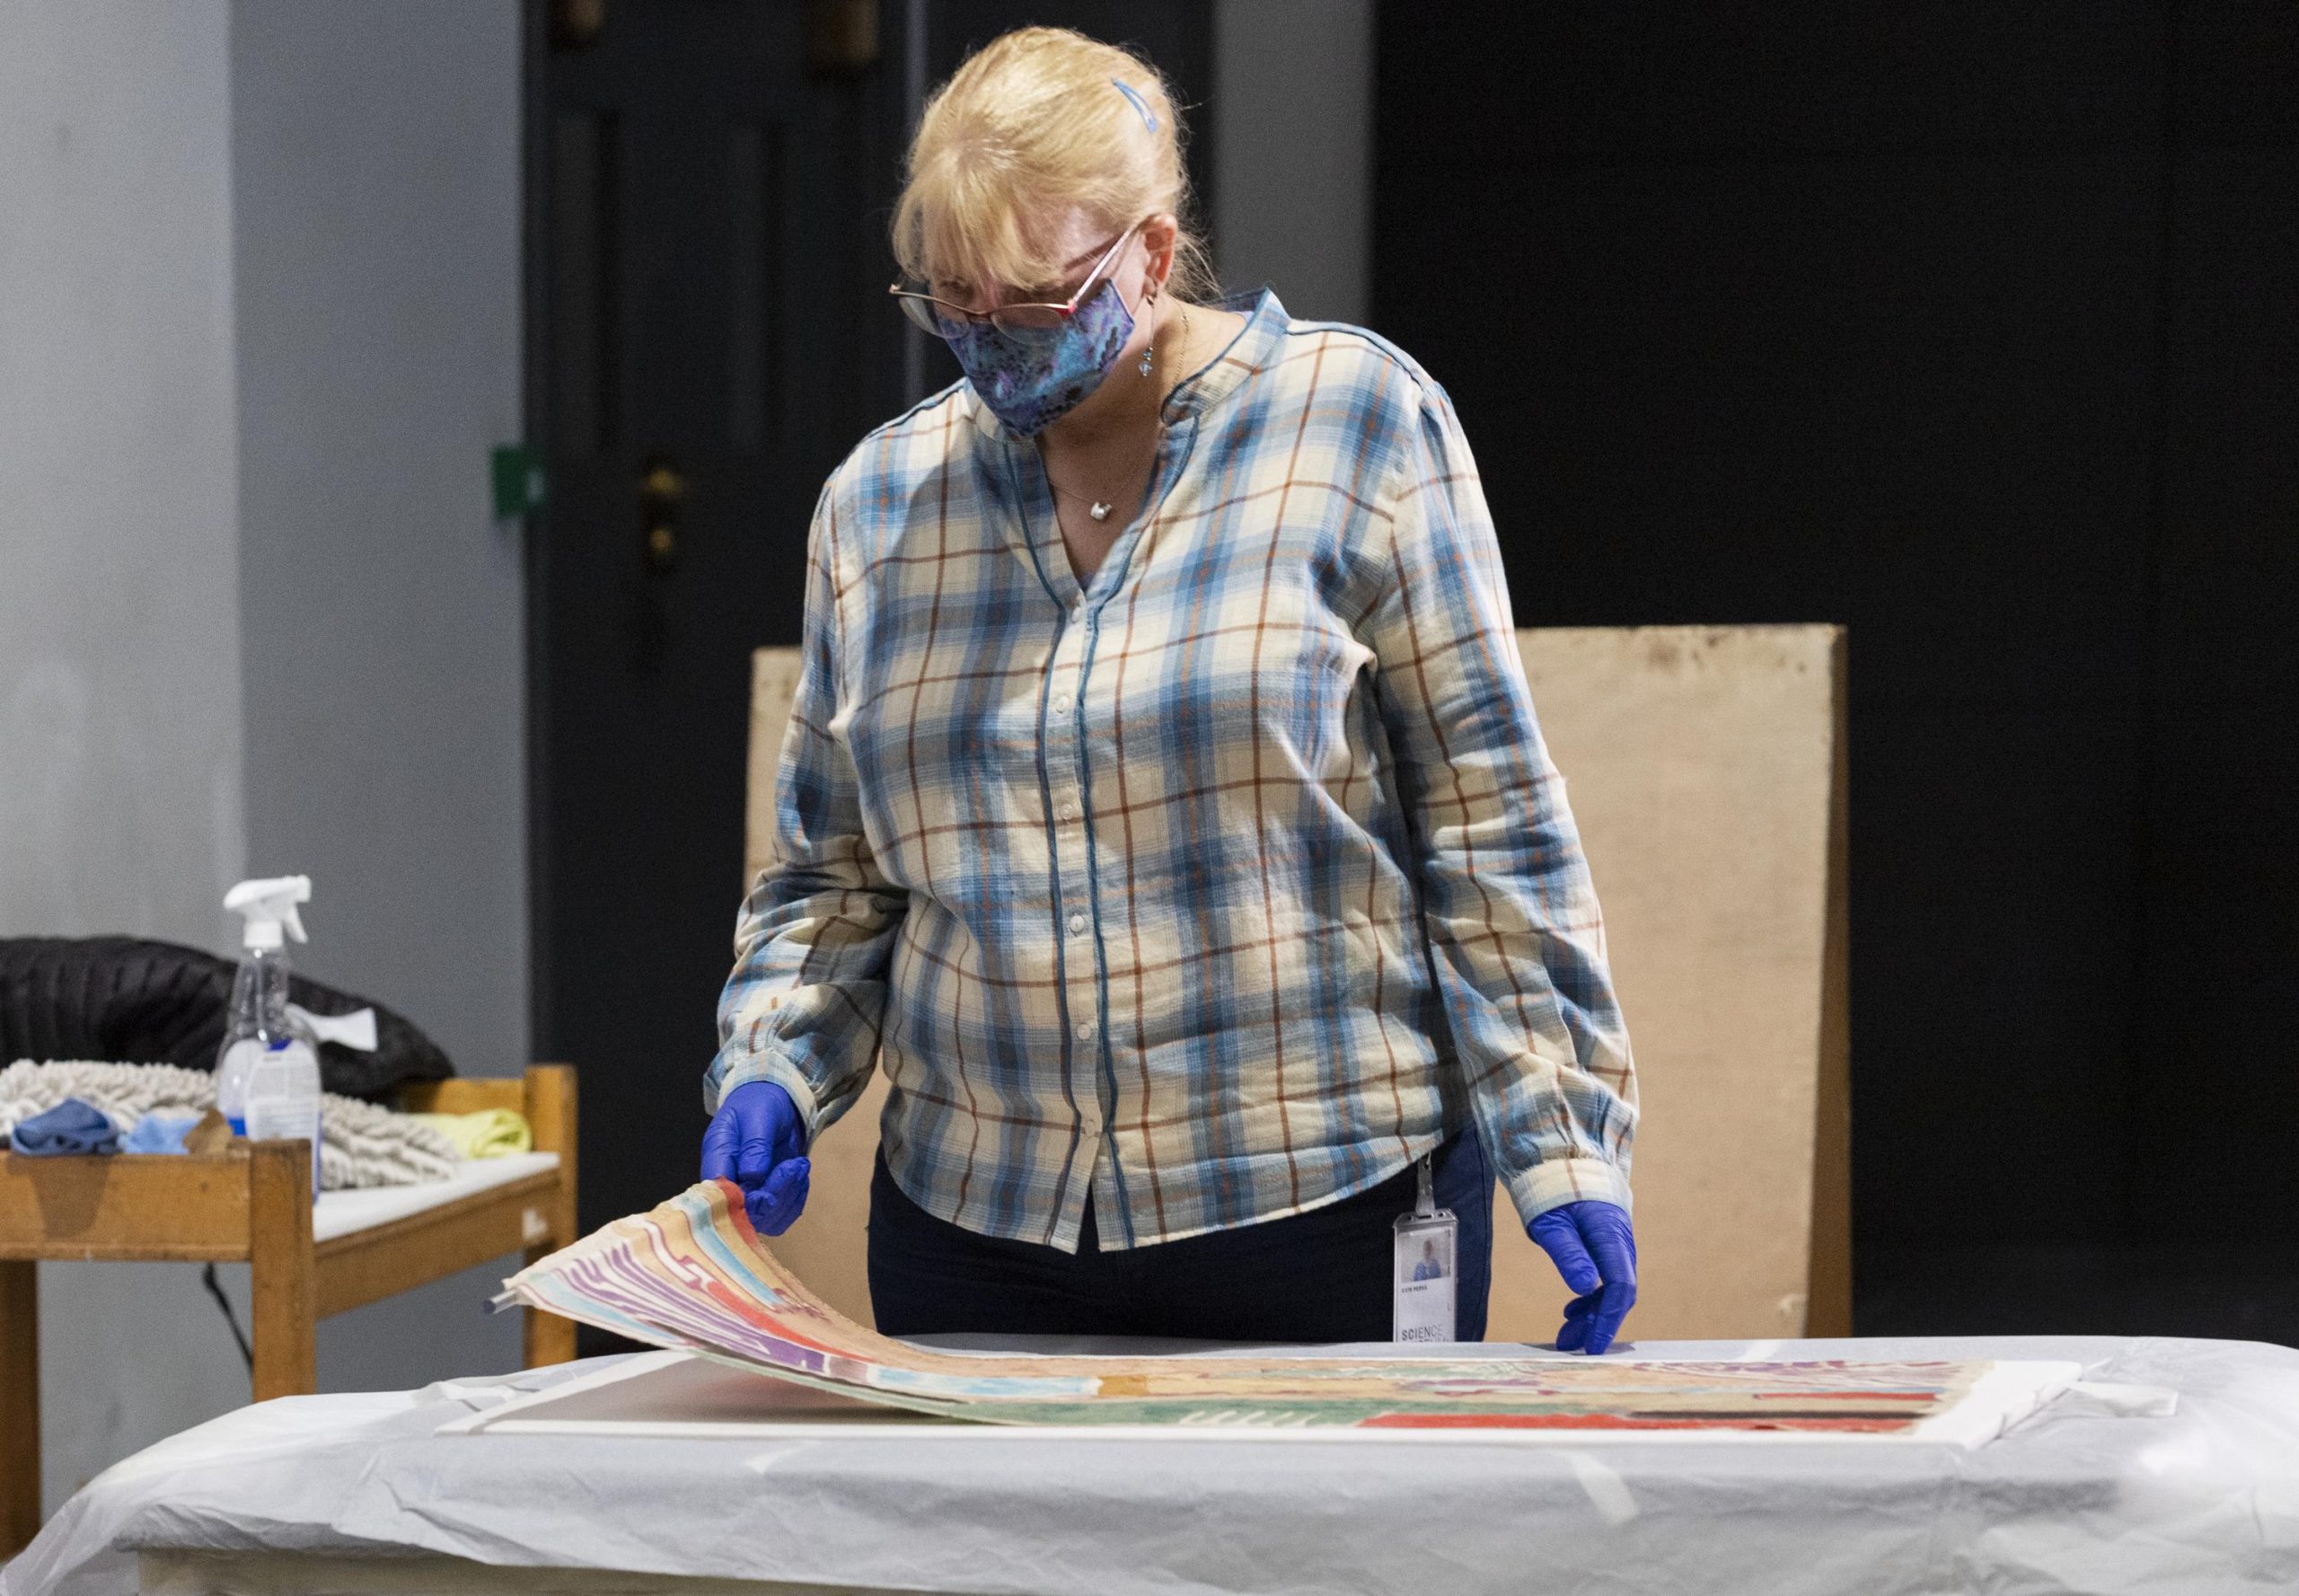 Conservator Kate prepares to install the painted silk item in its new display at the Science Museum.